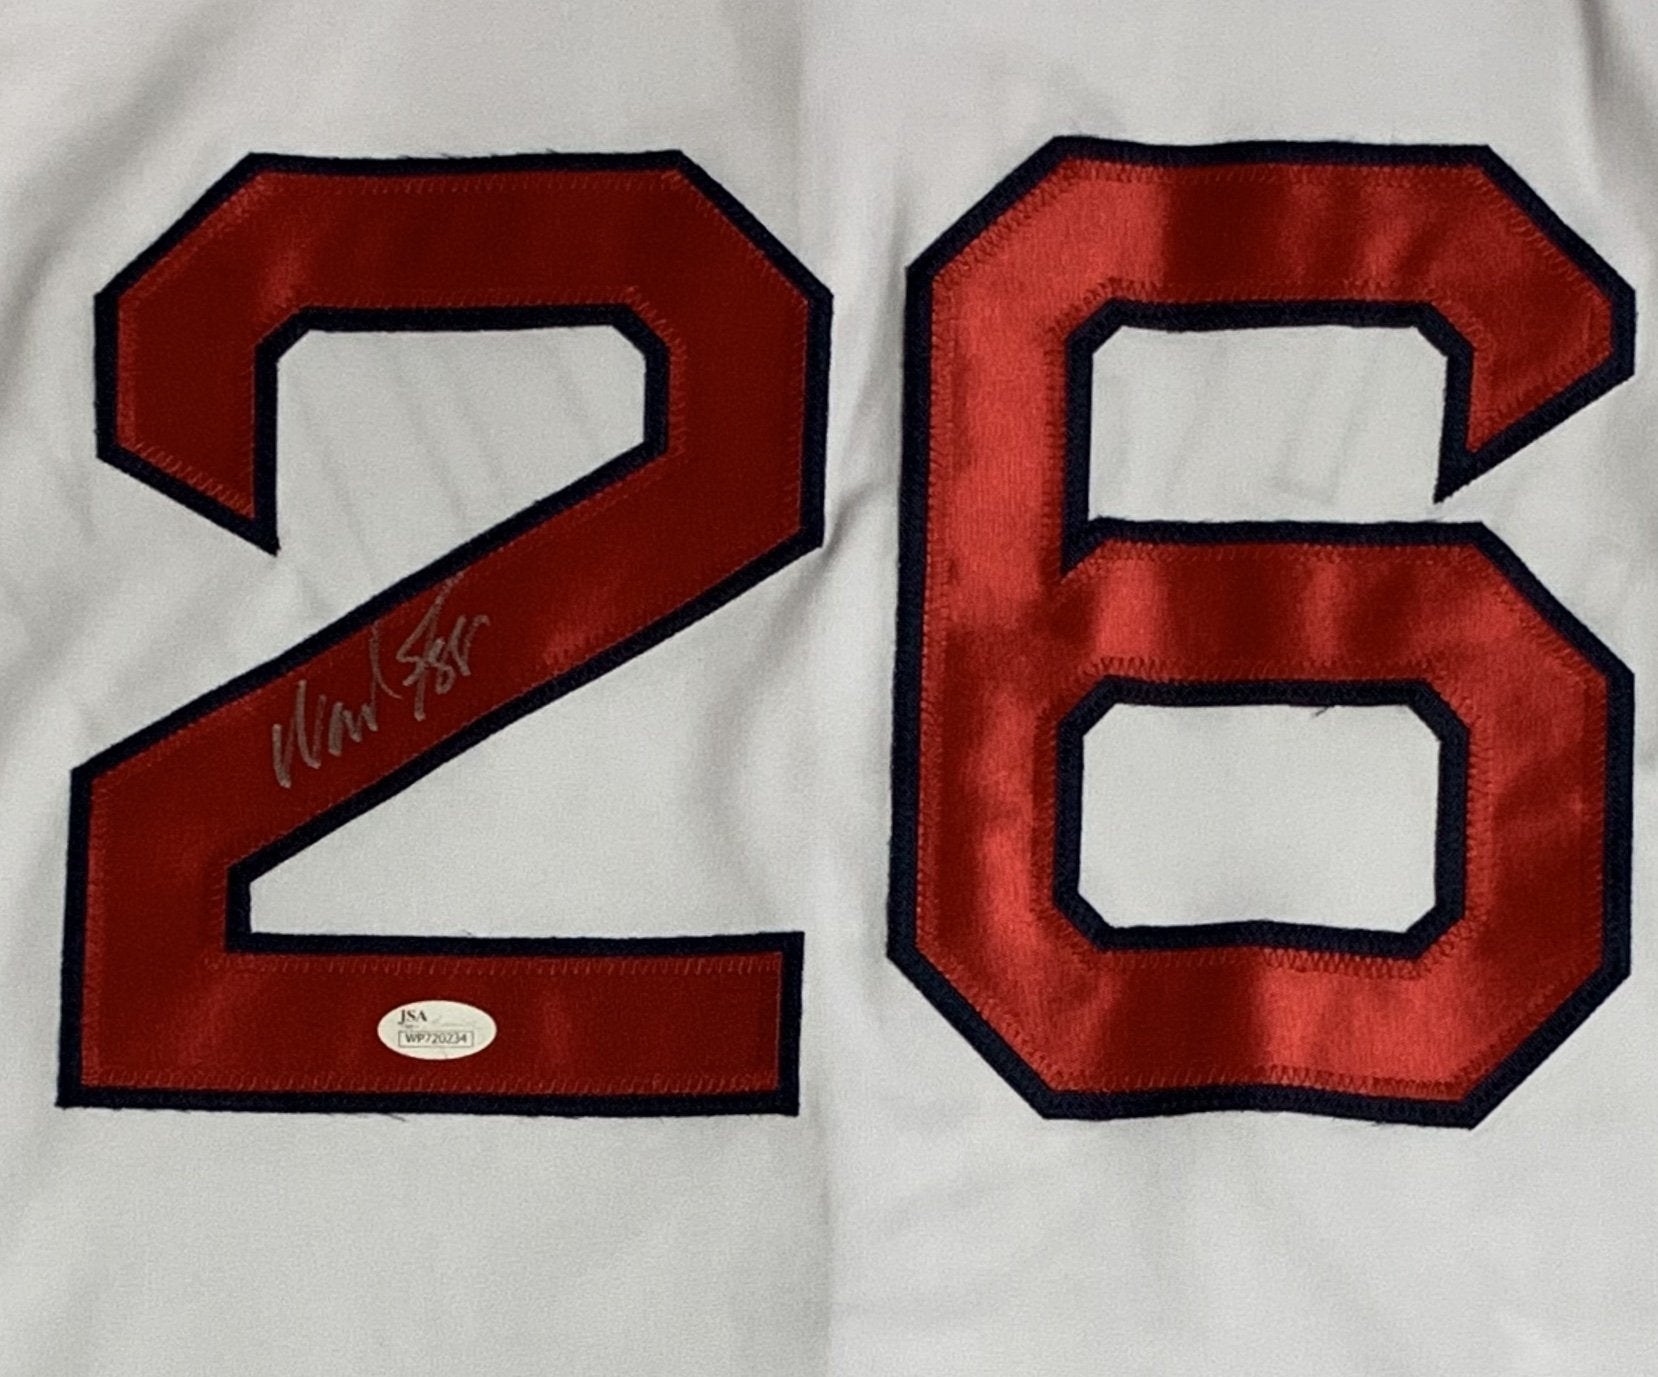 Wade Boggs New York Yankees Autographed White Nike Replica Jersey